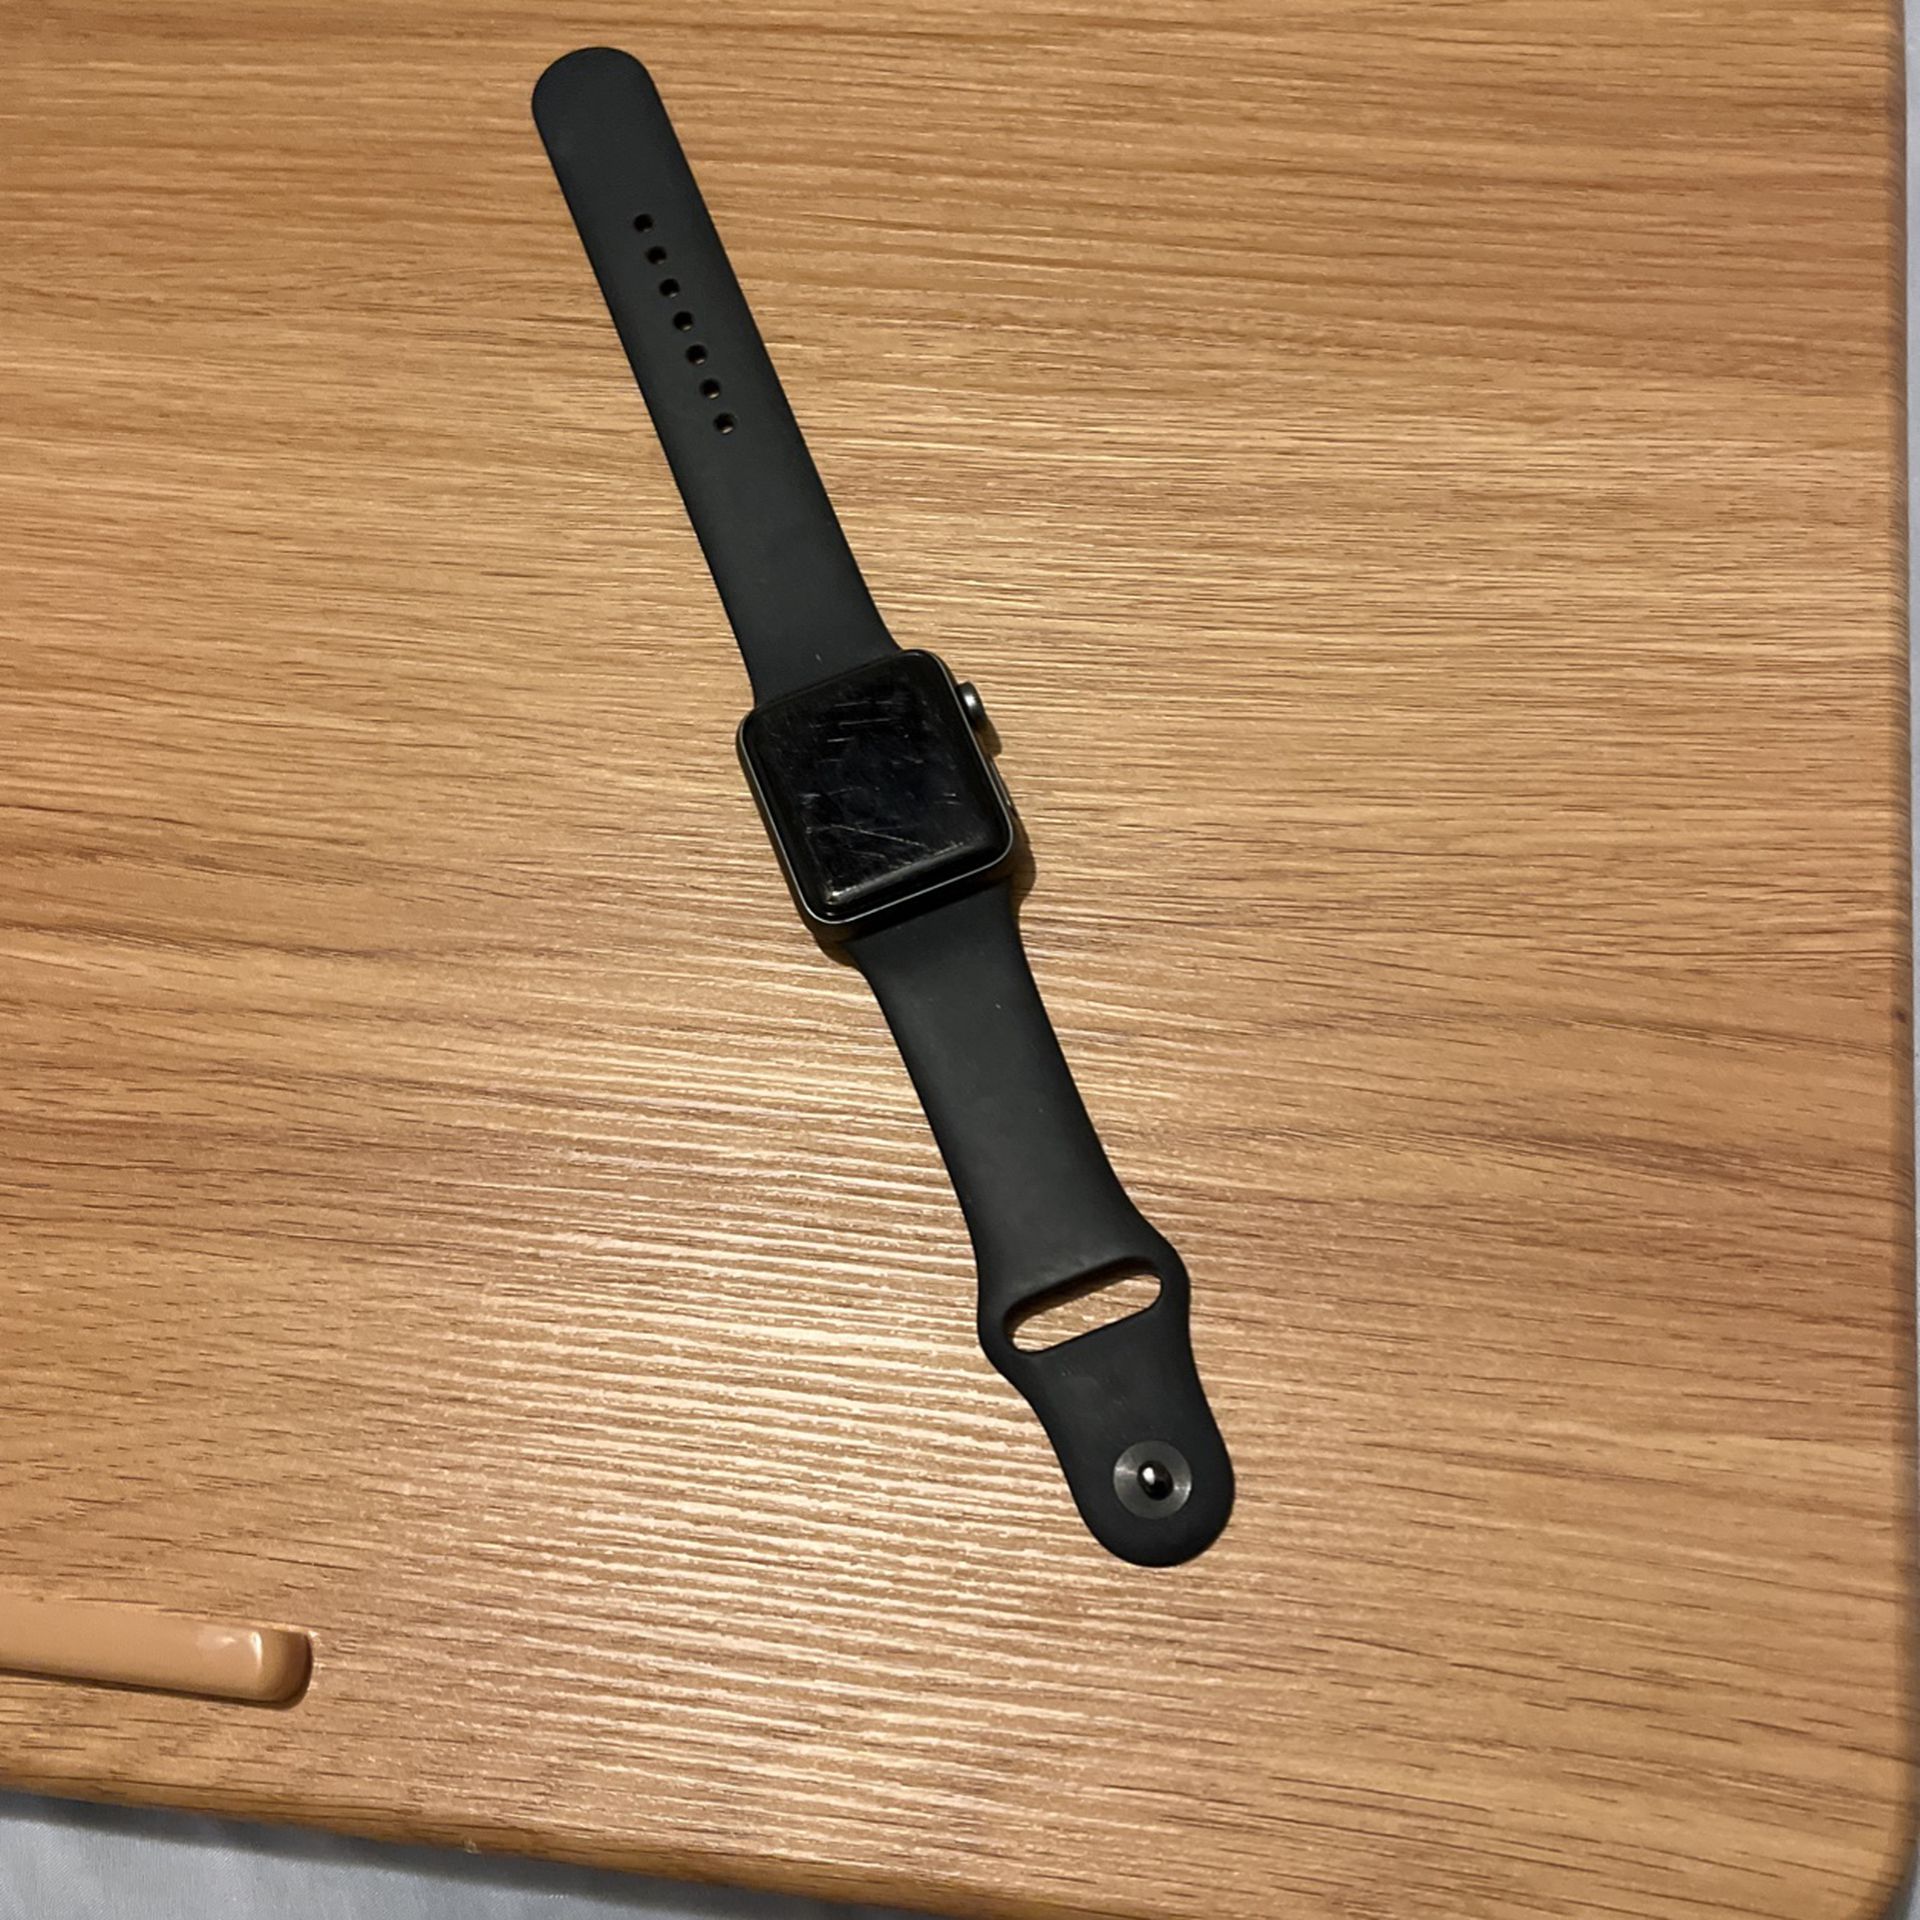 SERIES 3 Apple Watch W/ Charger 